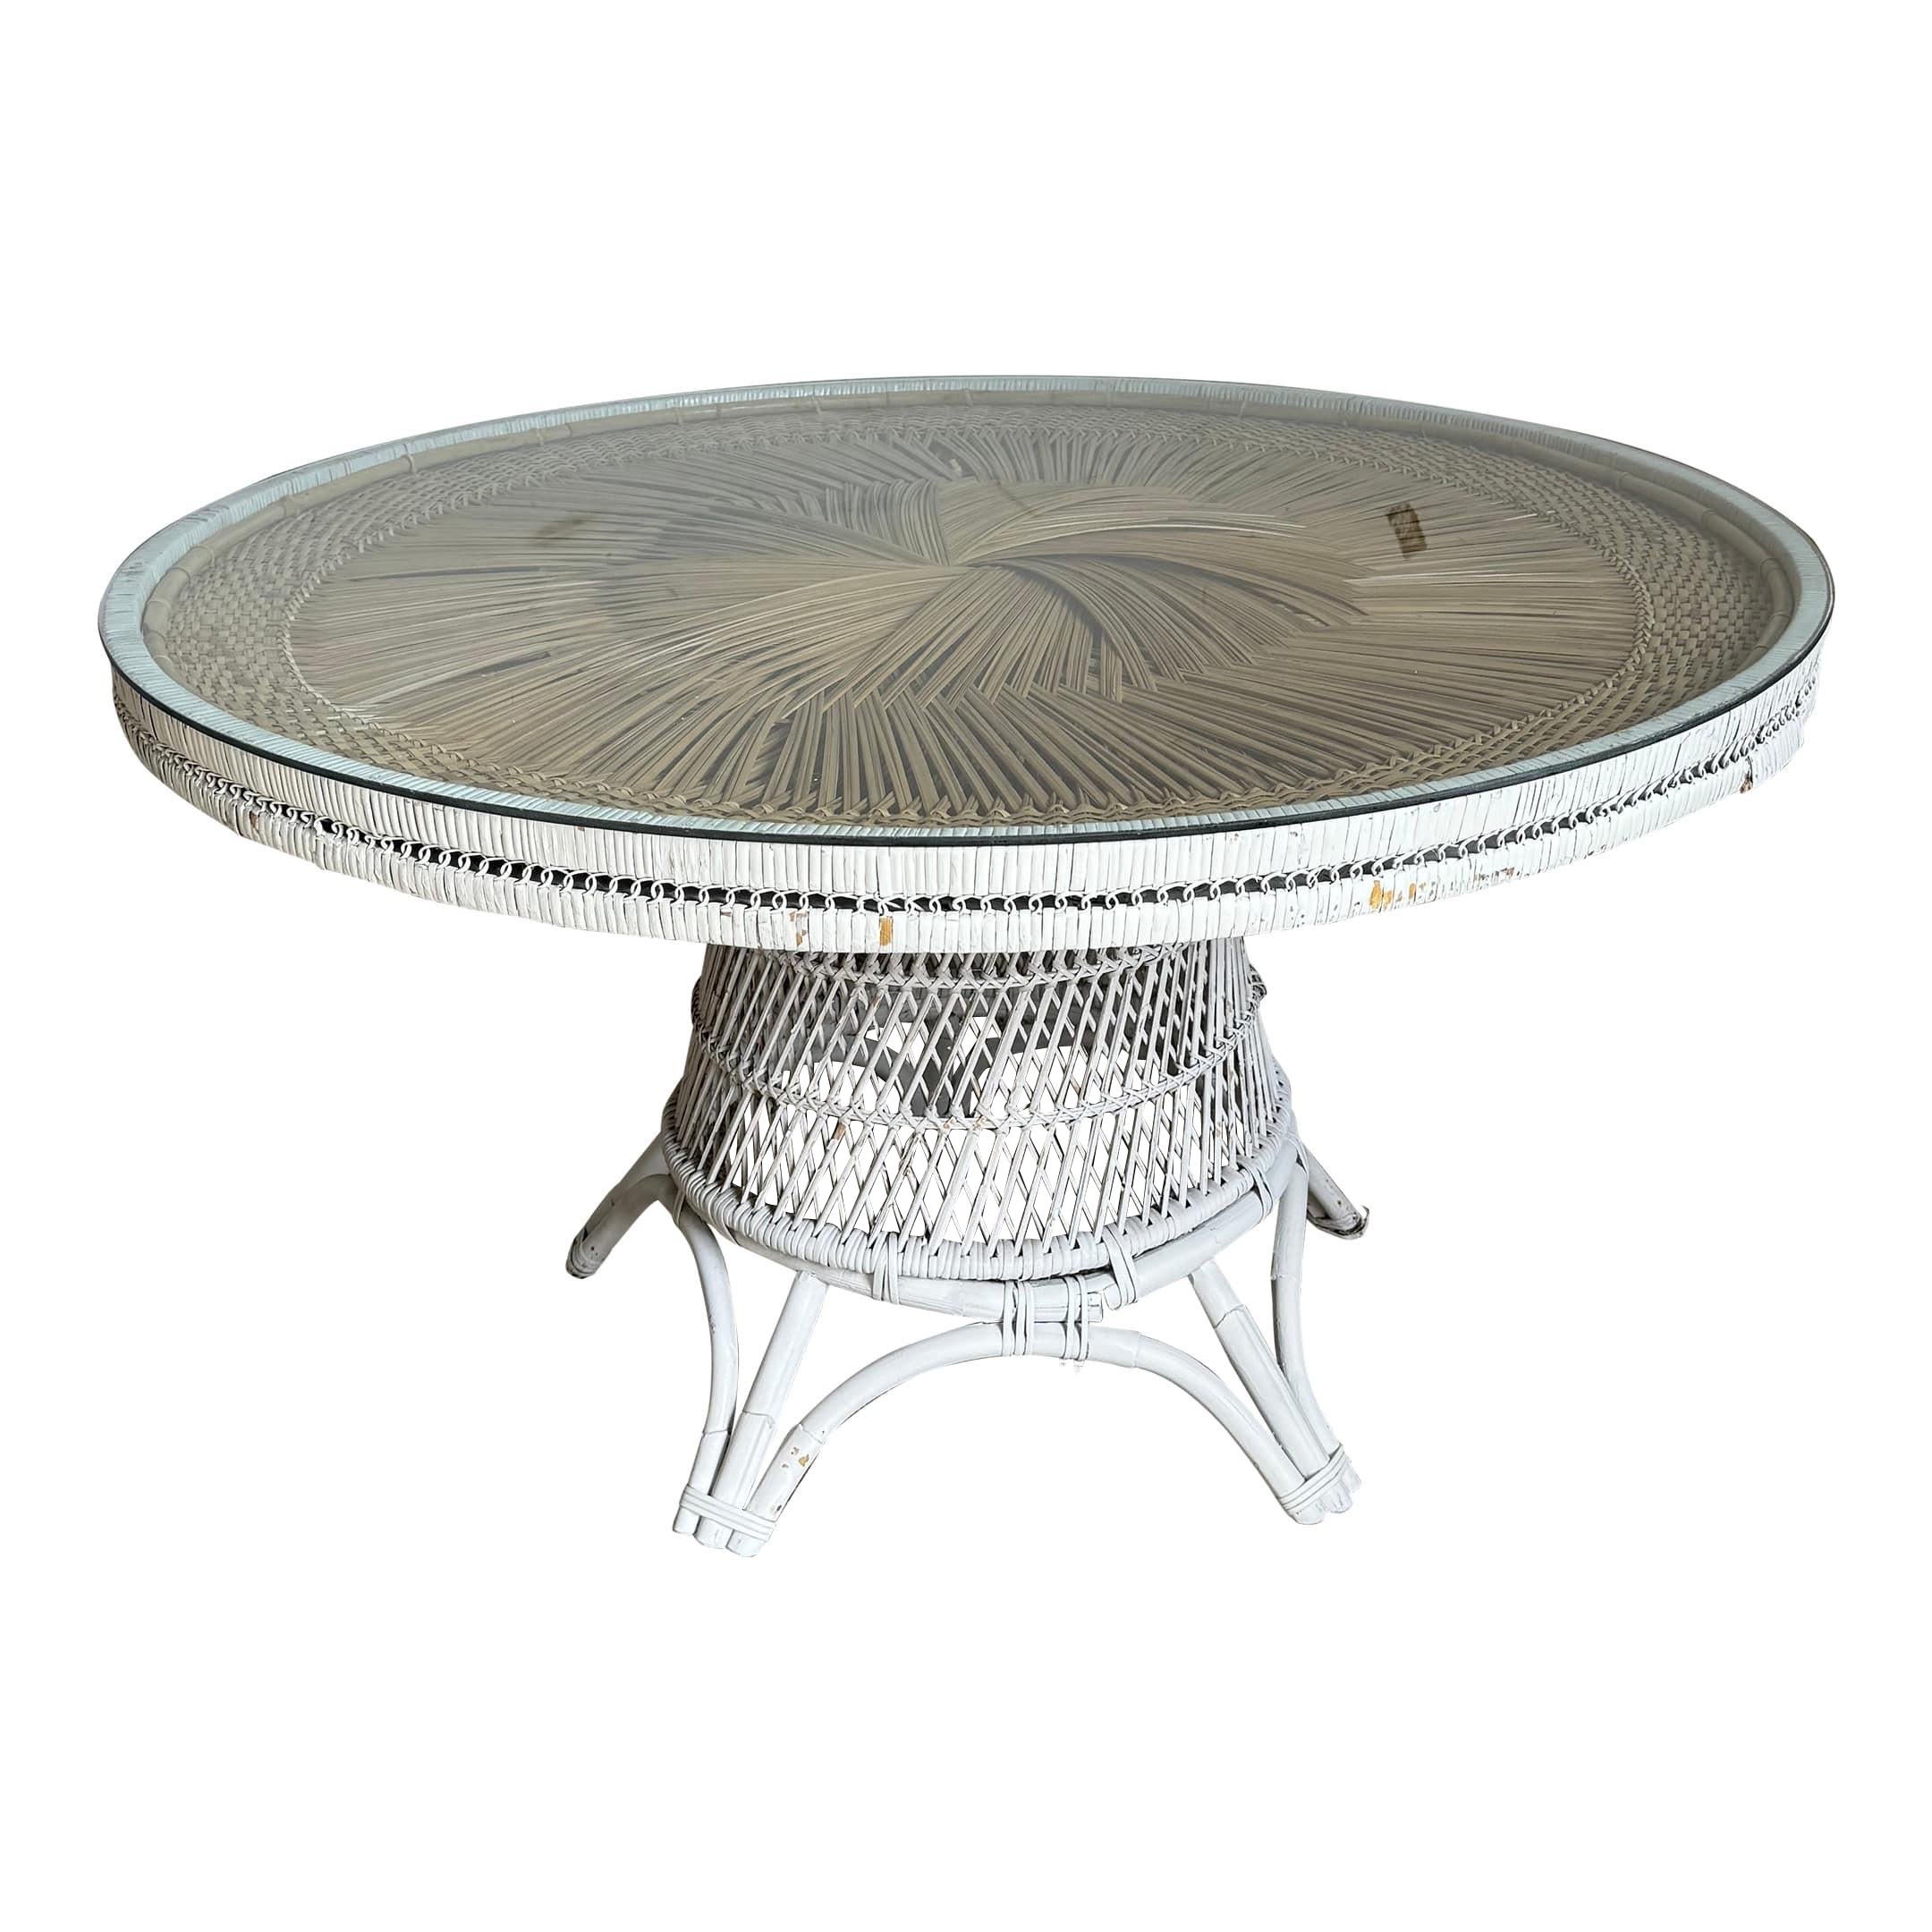 Boho Chic Buri Rattan White Dining Table With Glass Top For Sale